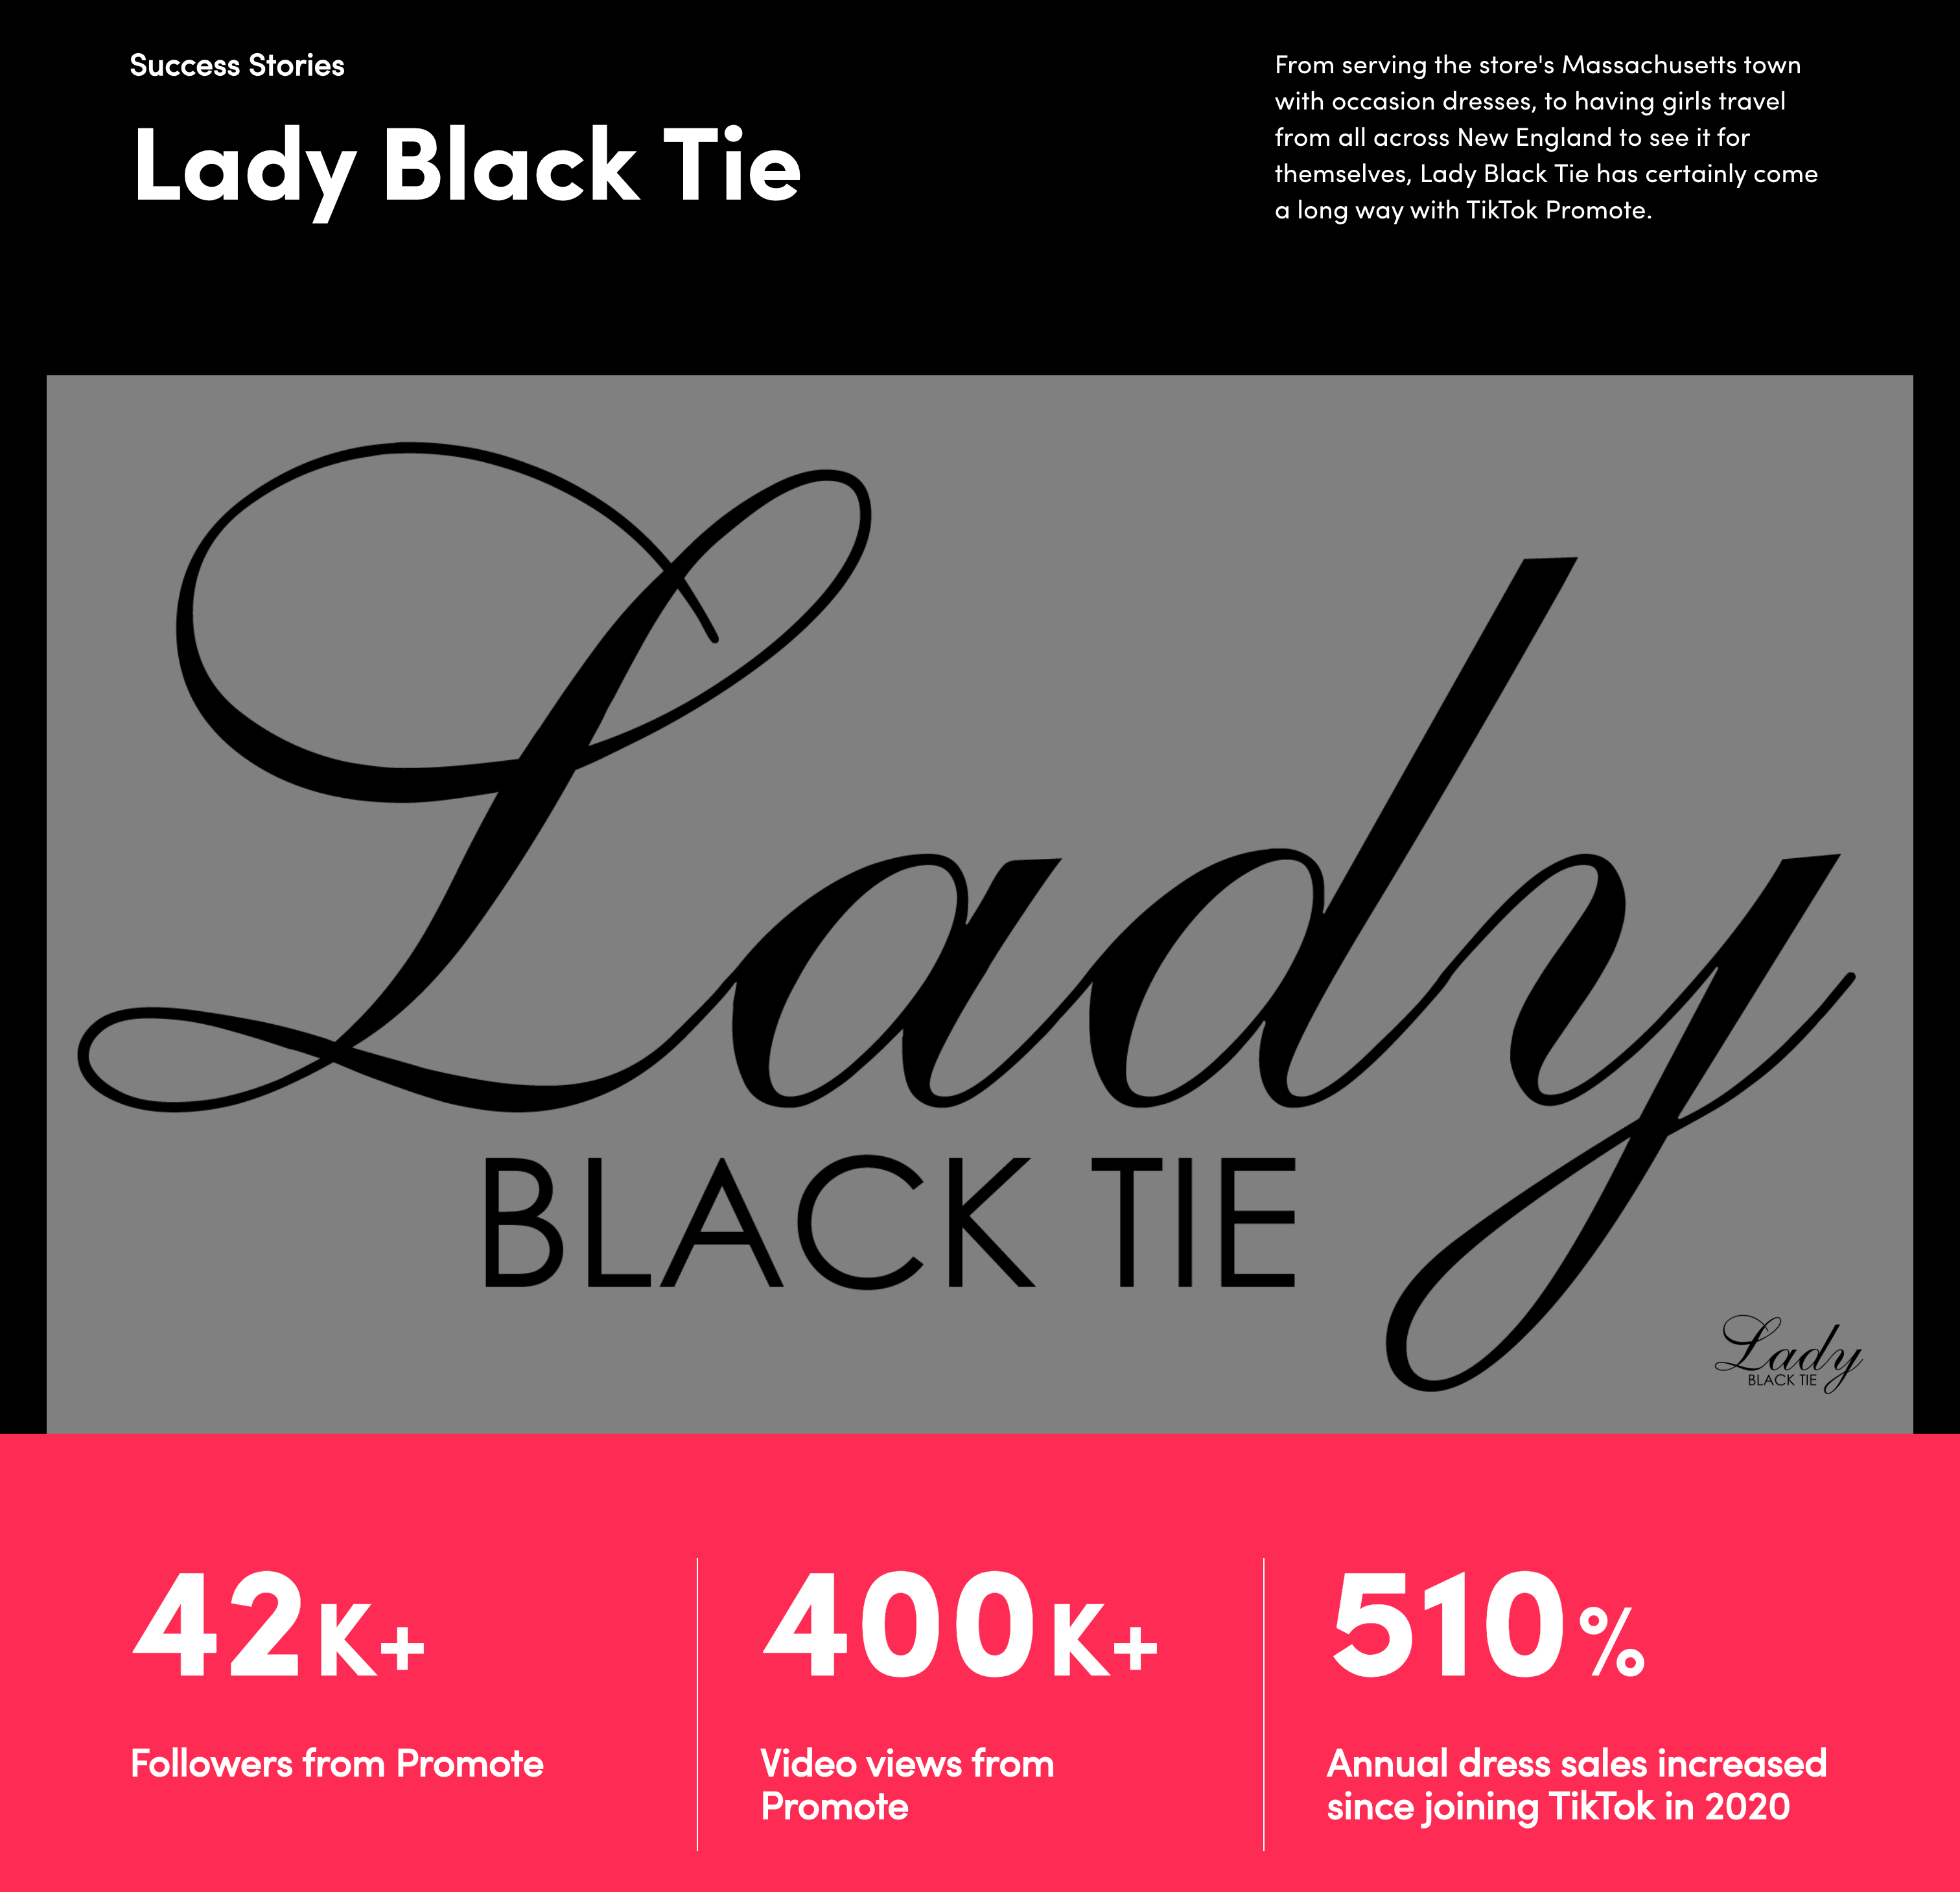 TikTok for business success story of Lady Black Tie showing results like 42K+ followers from Promote and 510% annual dress sales increase since joining TikTok in 2020.